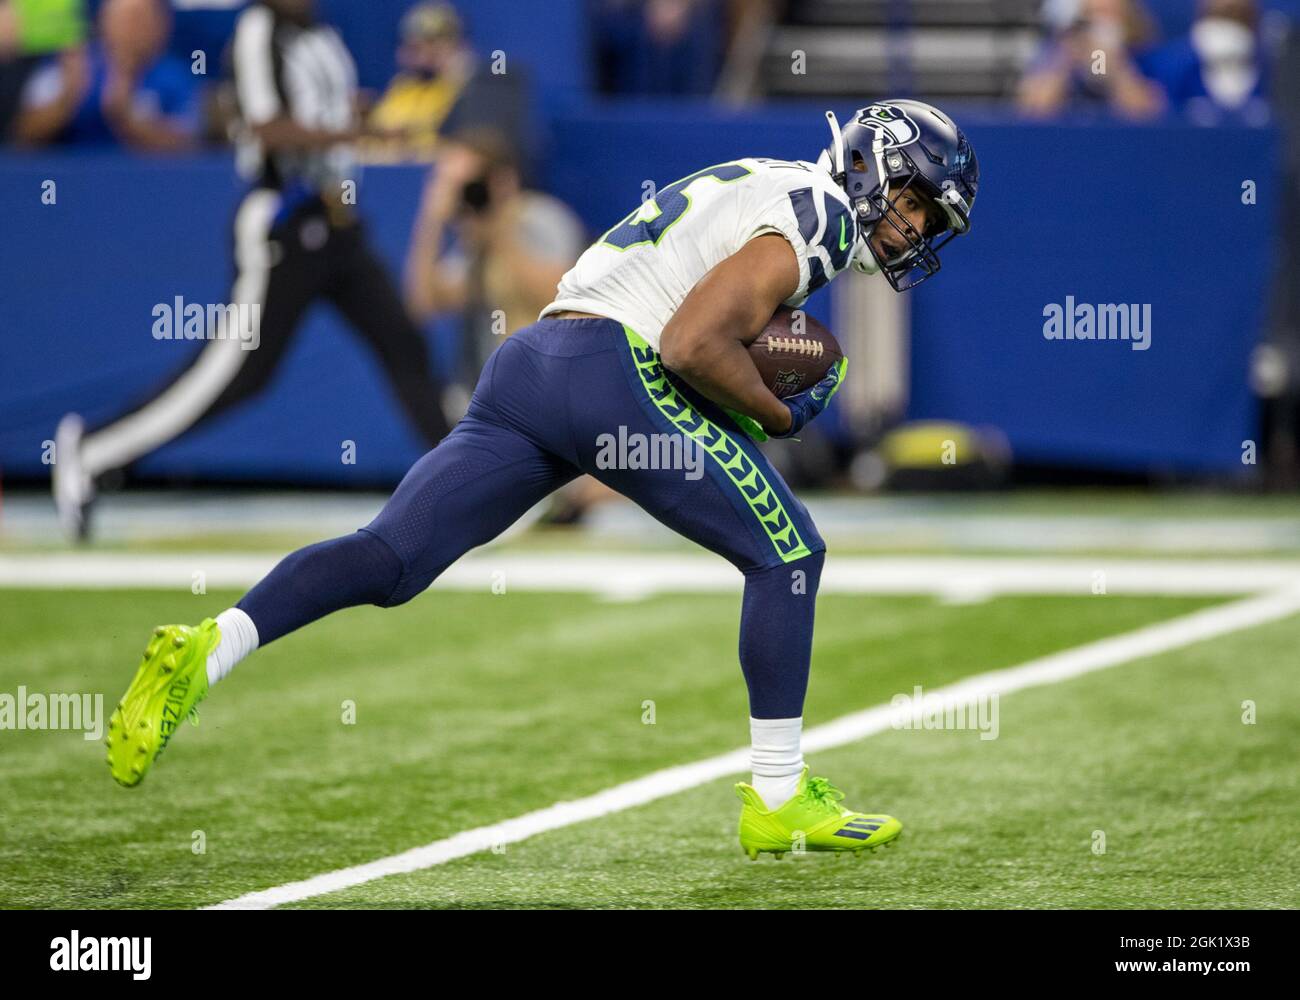 September 12, 2021: Seattle Seahawks wide receiver Tyler Lockett (16) runs with the ball for a touchdown during NFL football game action between the Seattle Seahawks and the Indianapolis Colts at Lucas Oil Stadium in Indianapolis, Indiana. Seattle defeated Indianapolis 28-16. John Mersits/CSM/Sipa USA.(Credit Image: &copy; John Mersits/CSM/Sipa USA) Stock Photo